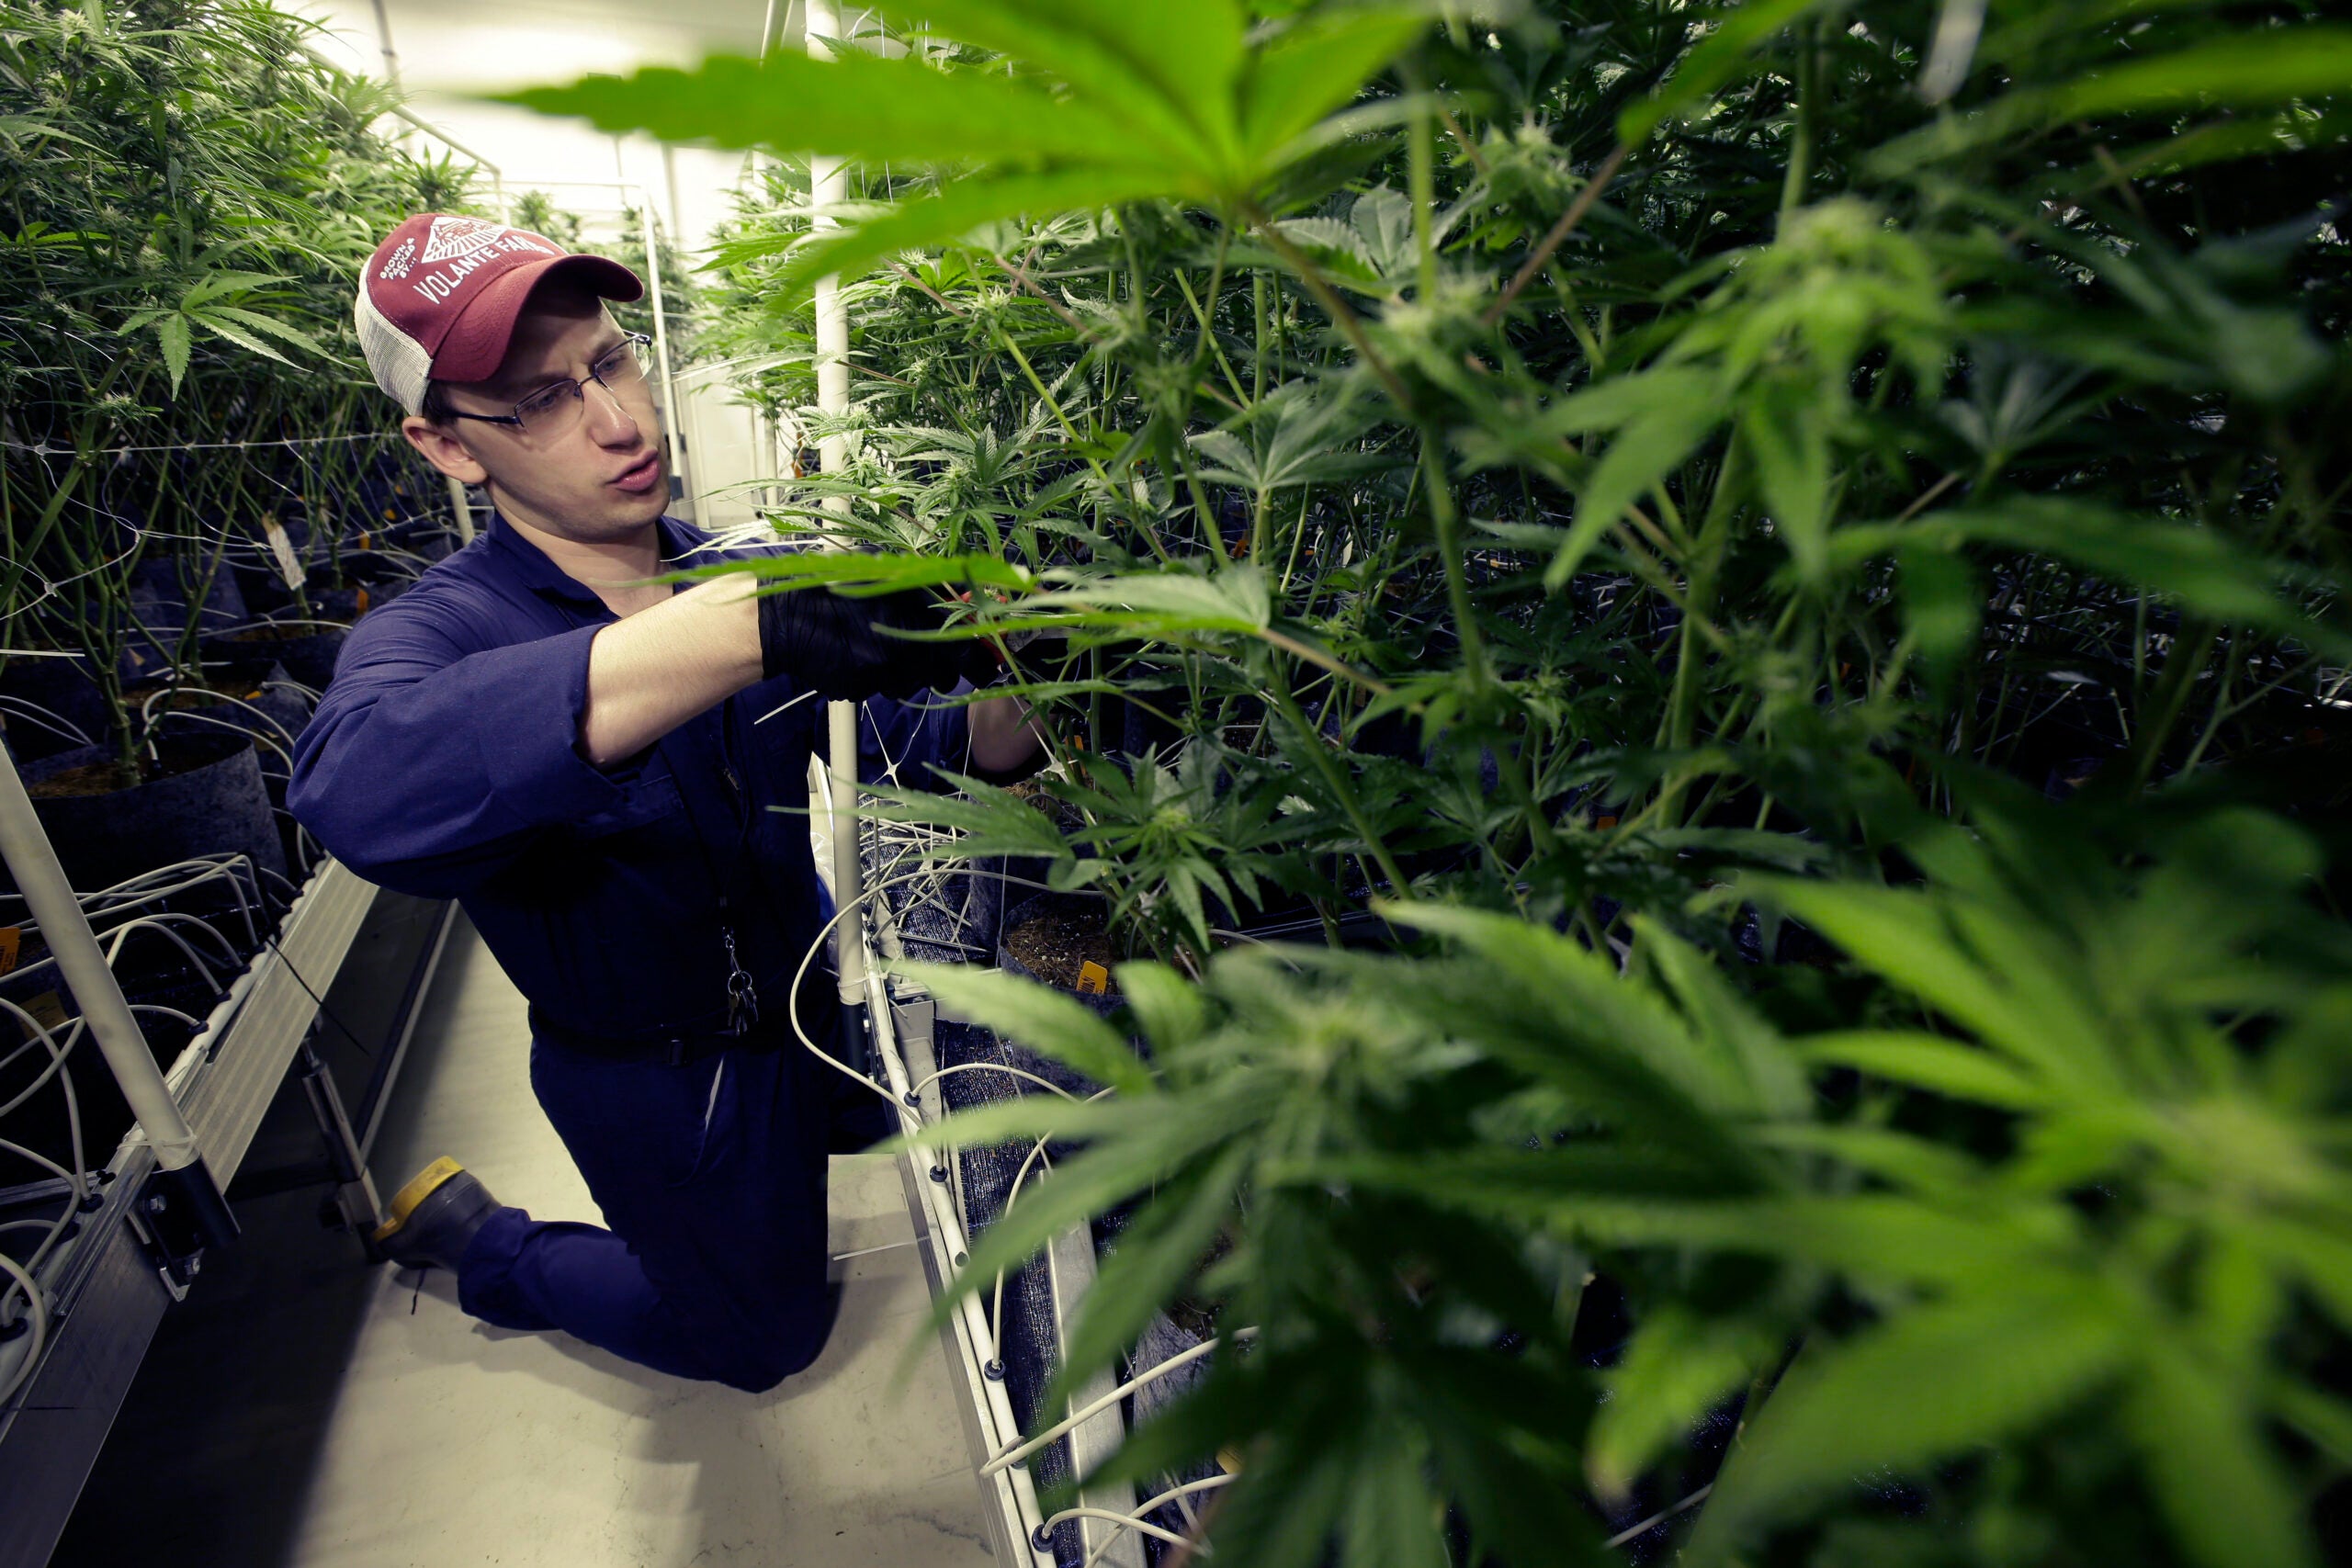 Want a job in Massachusetts's marijuana industry? Here's what to know.